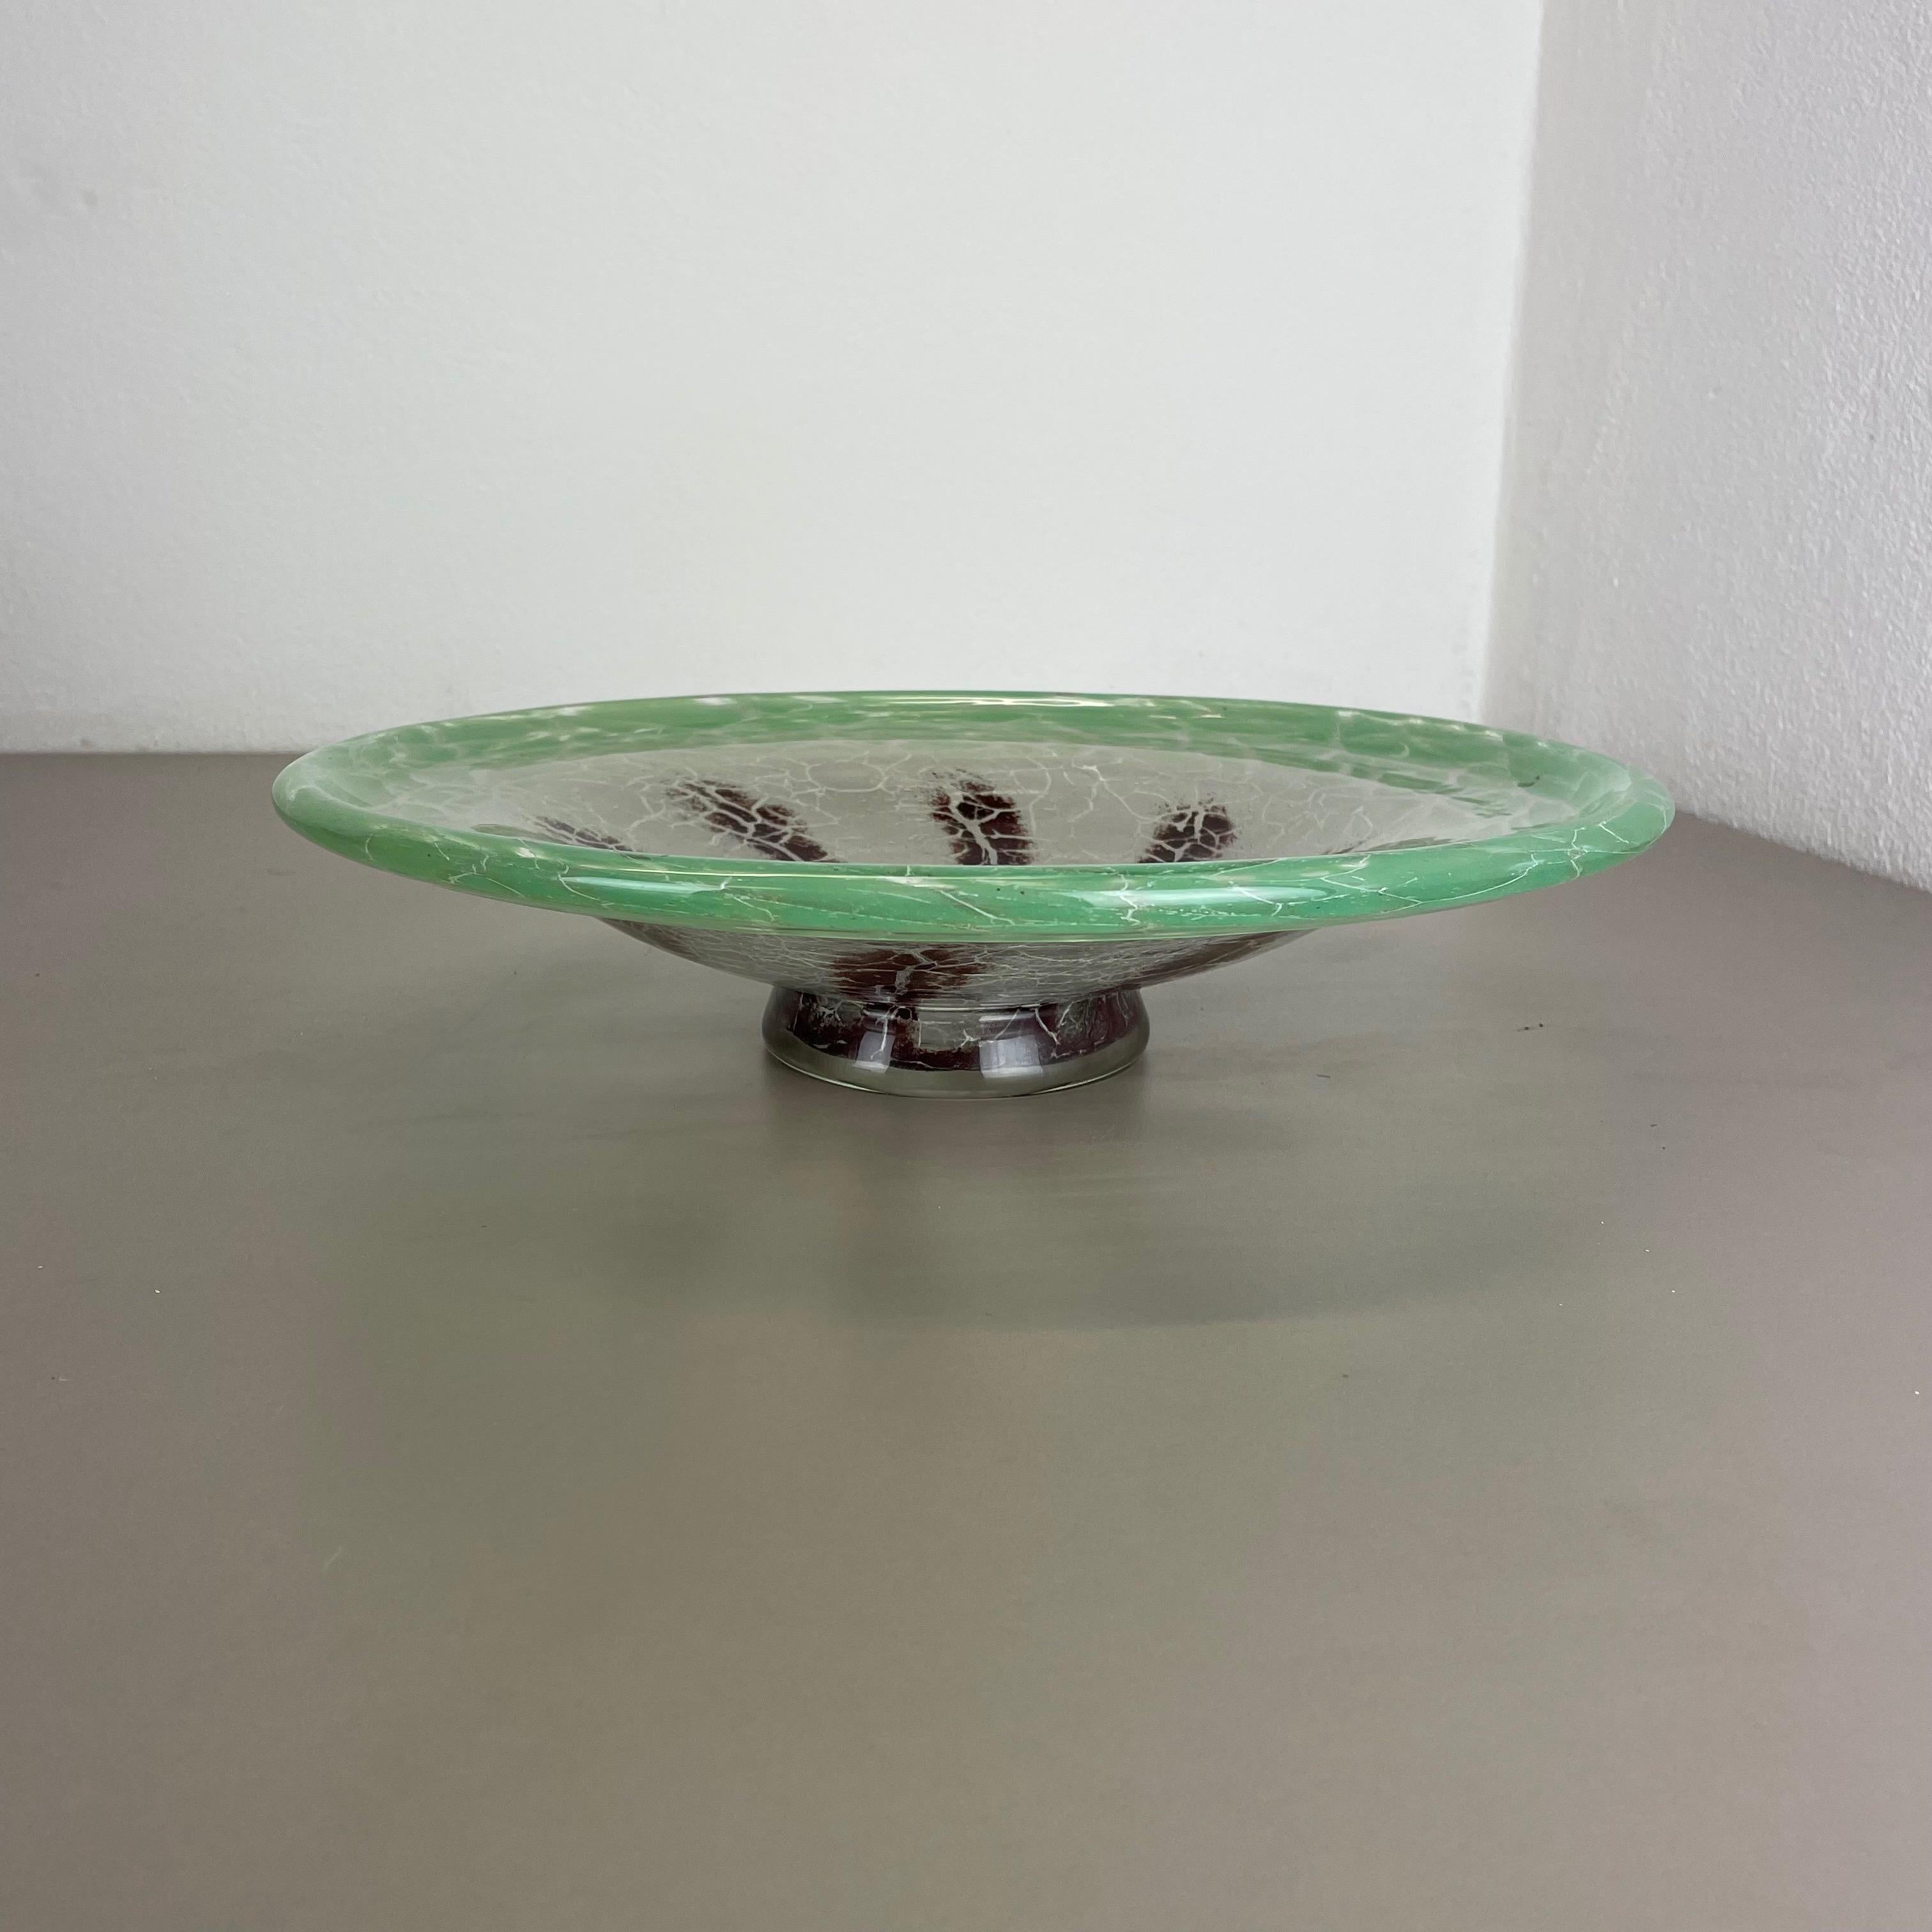 Large Glass Bowl by Karl Wiedmann for WMF Ikora, 1930s Baushaus Art Deco In Good Condition For Sale In Kirchlengern, DE